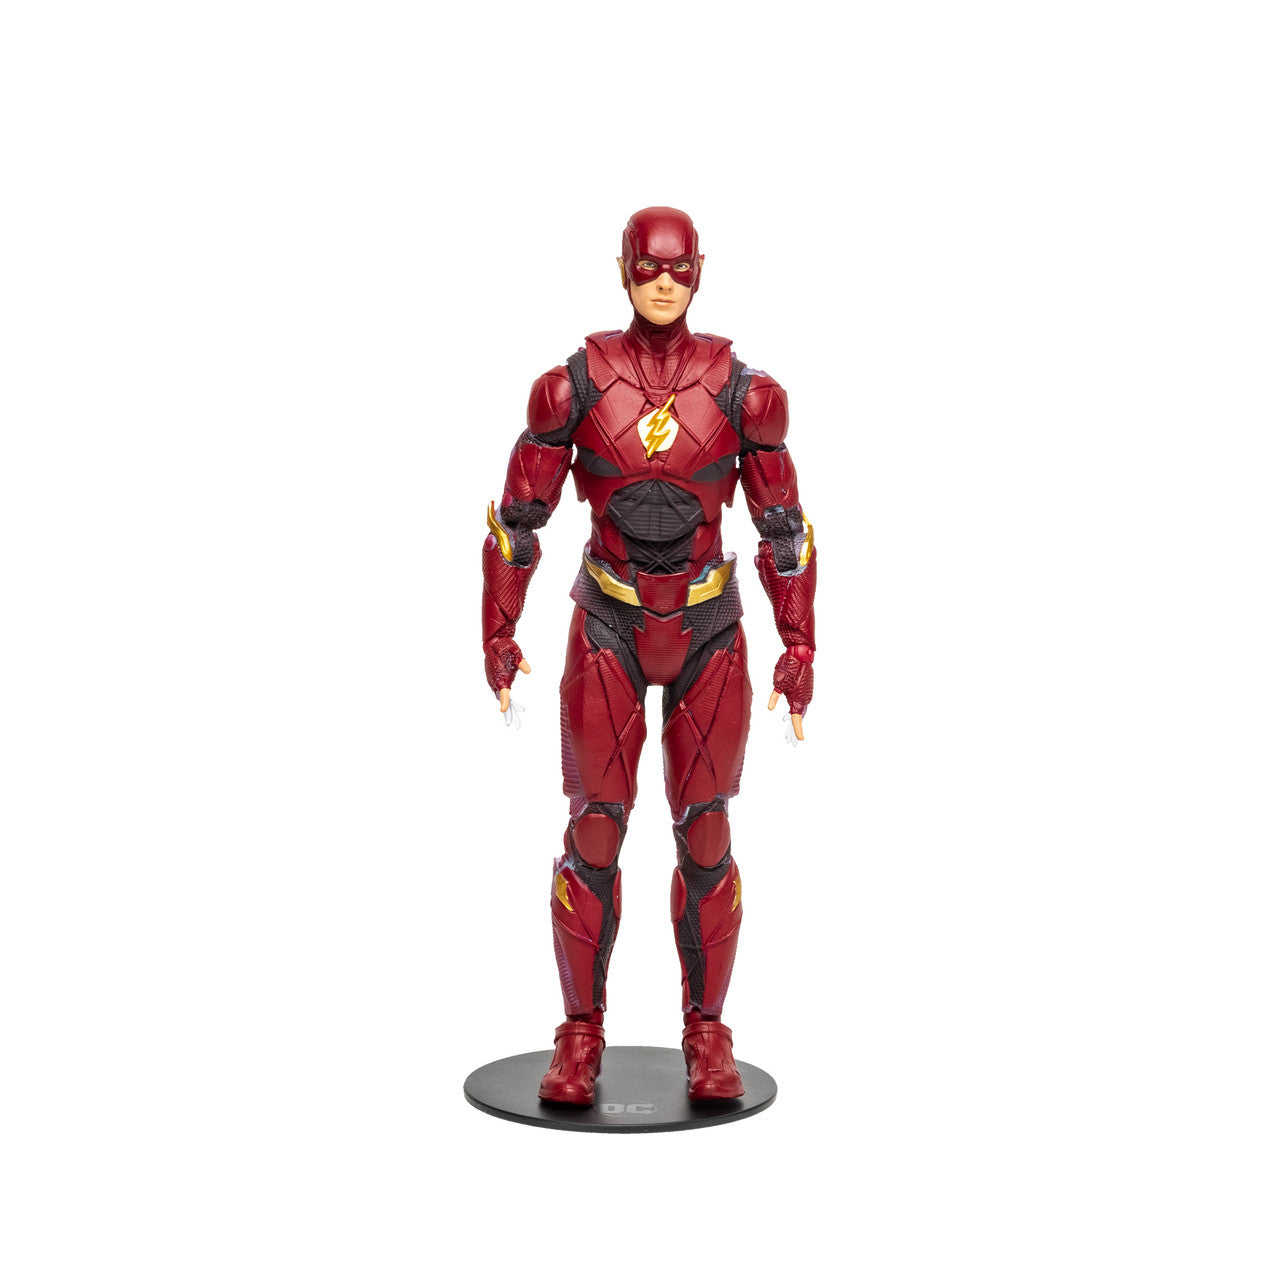 Speed Force Flash Justice League (DC Multiverse) NYCC Exclusive 7" Figure By Mcfarlane